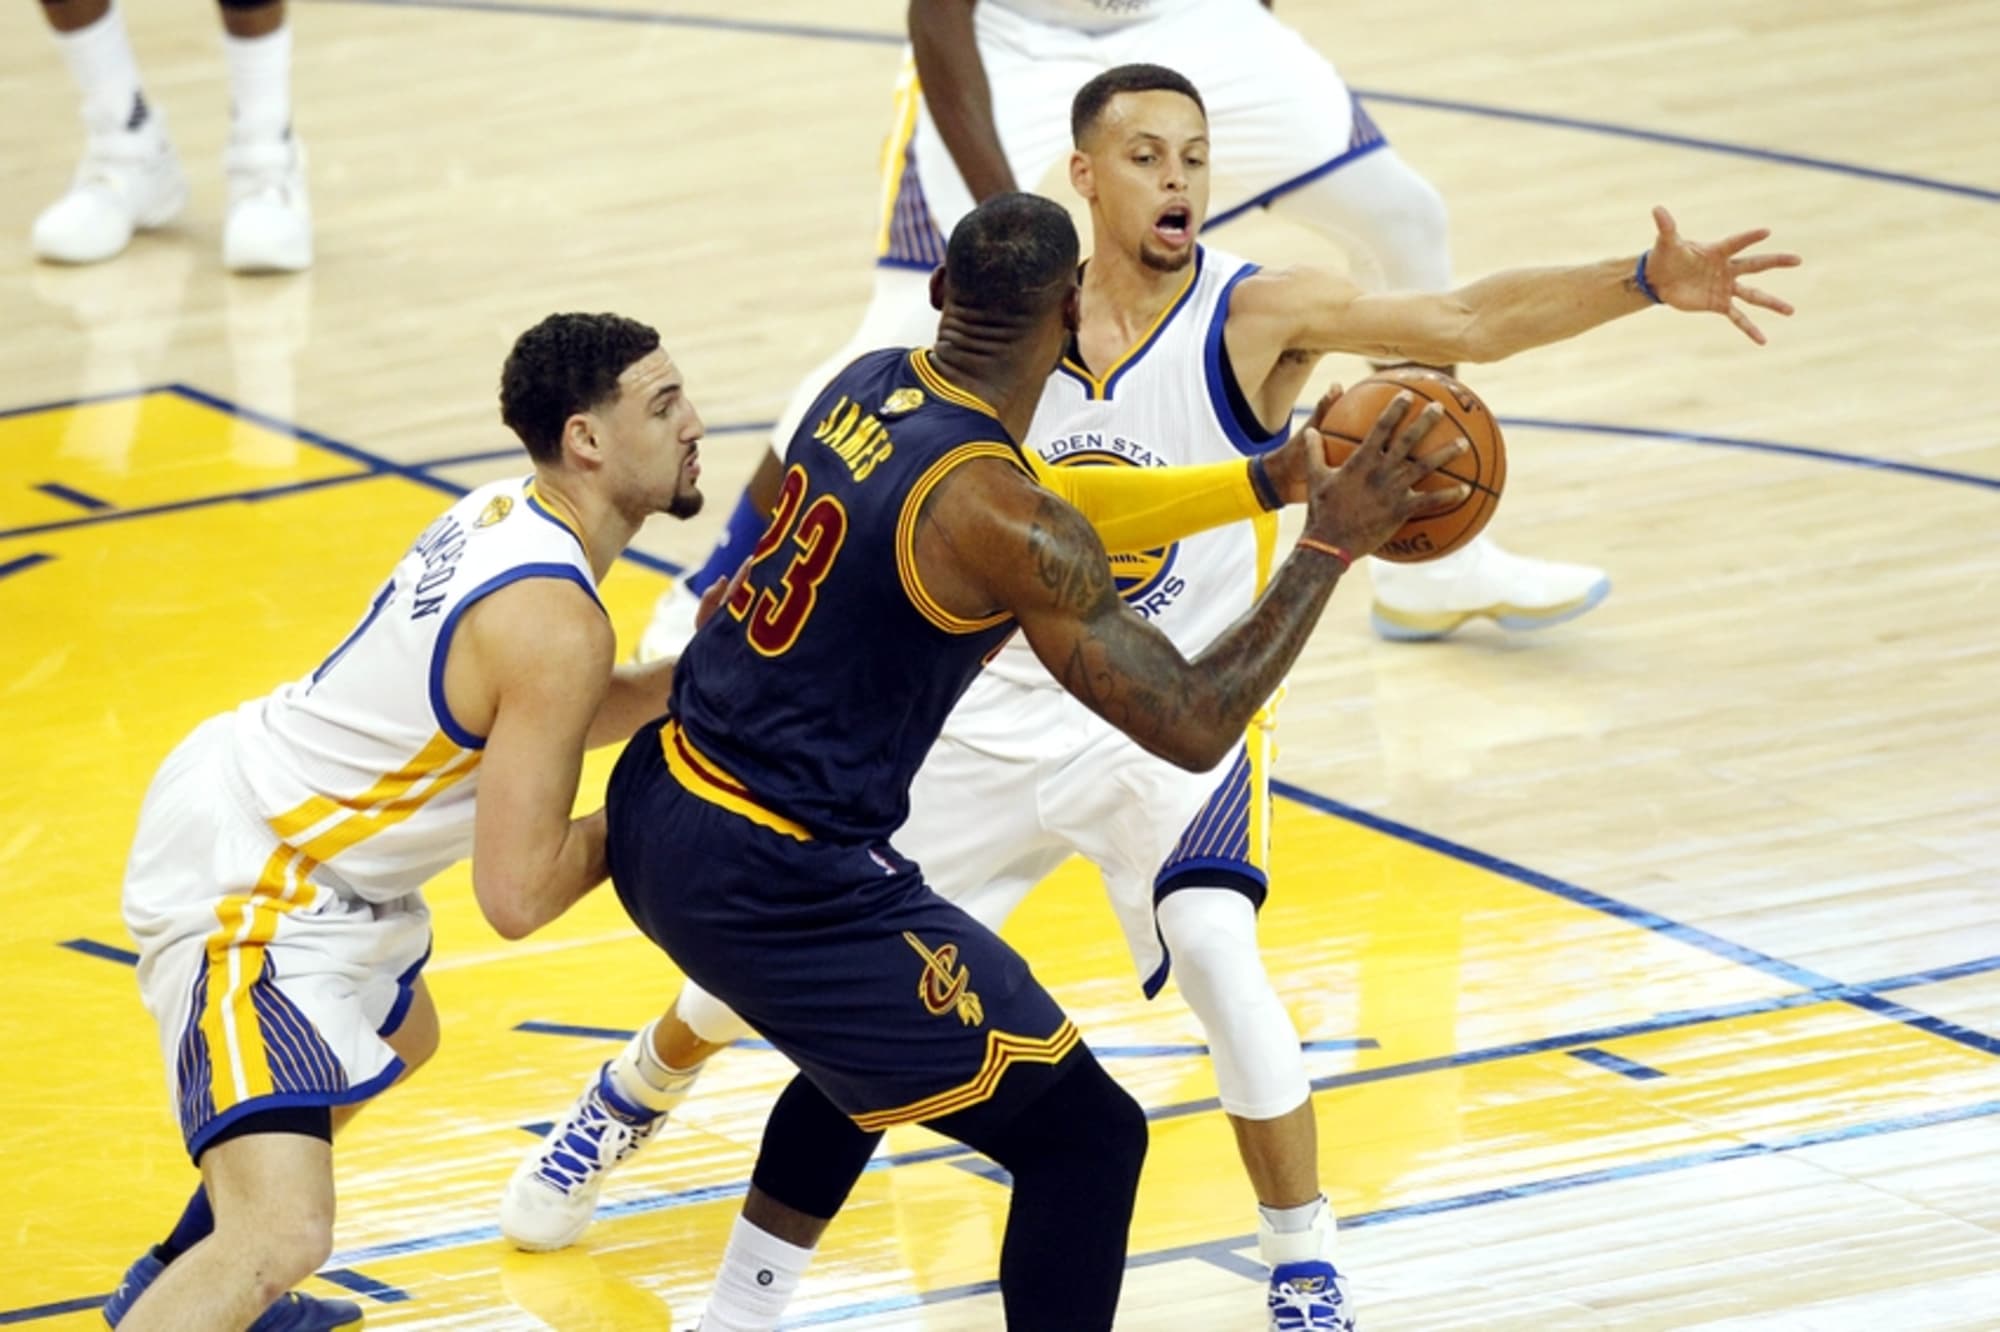 NBA Finals 2016: Stephen Curry and Klay Thompson were miserable